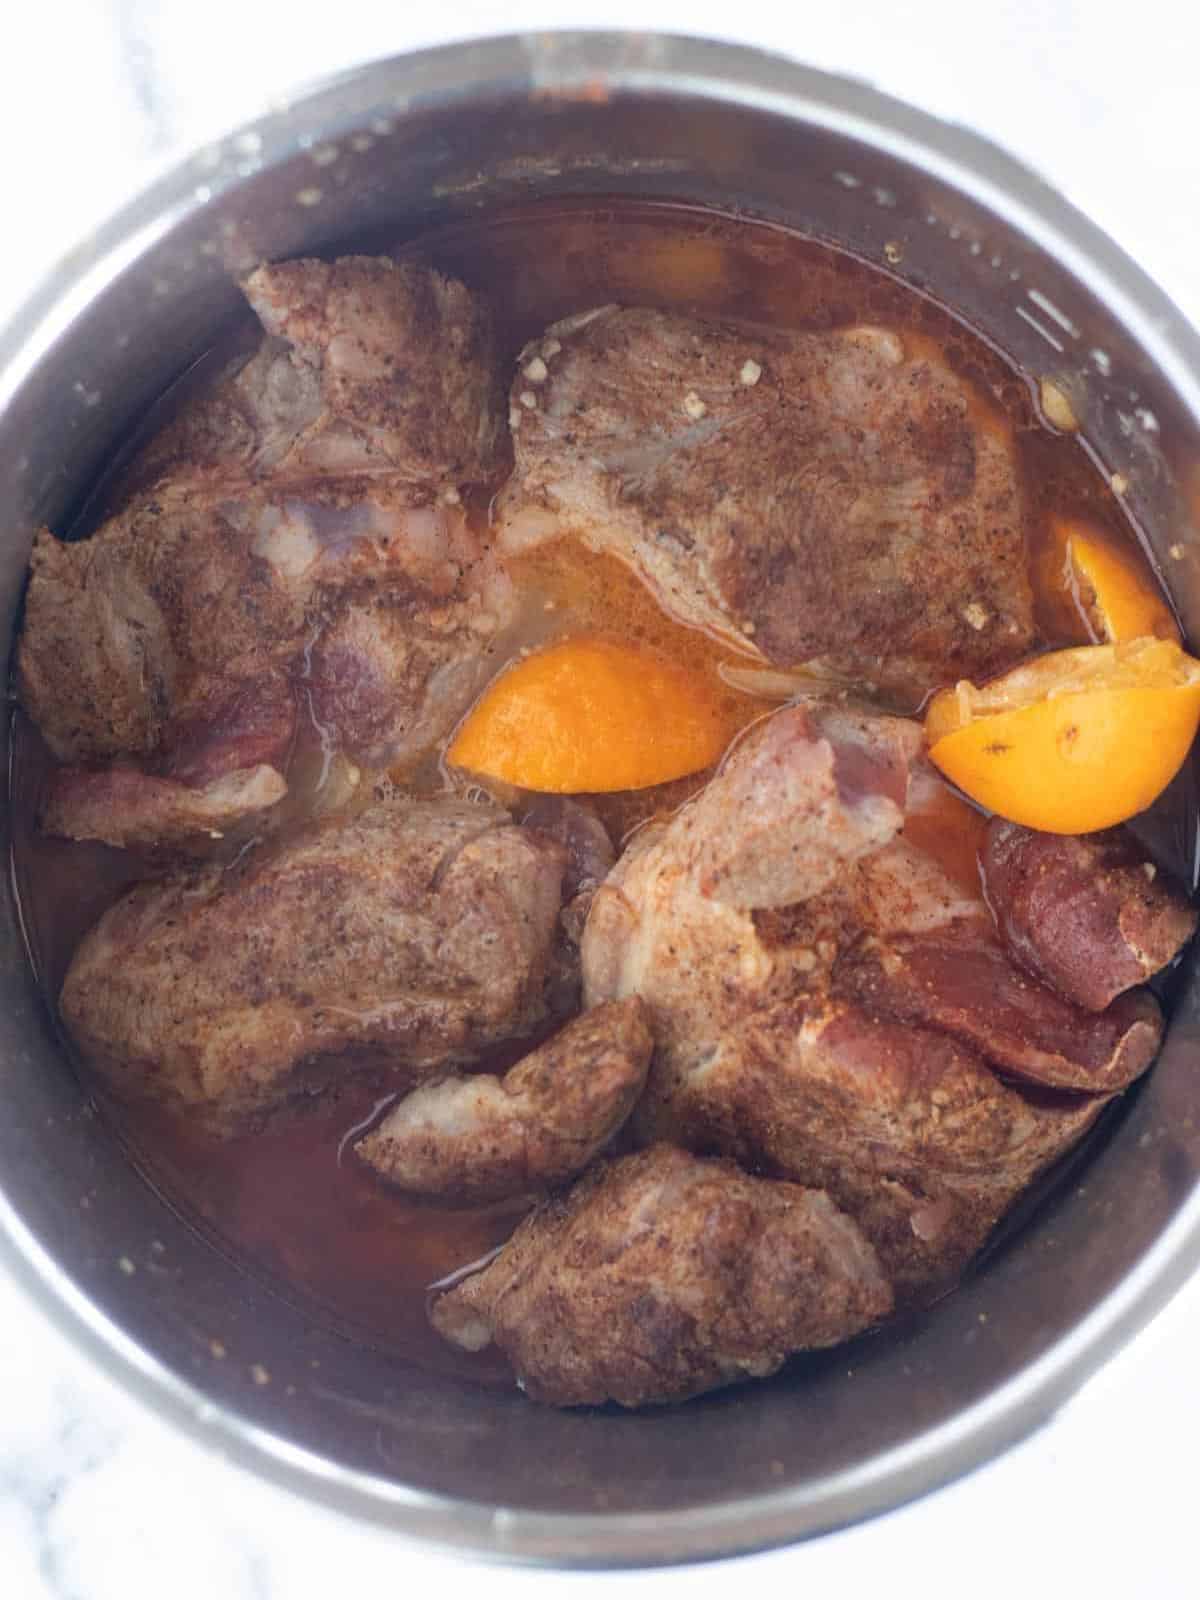 Cooked carnitas in the bowl of an instant pot.